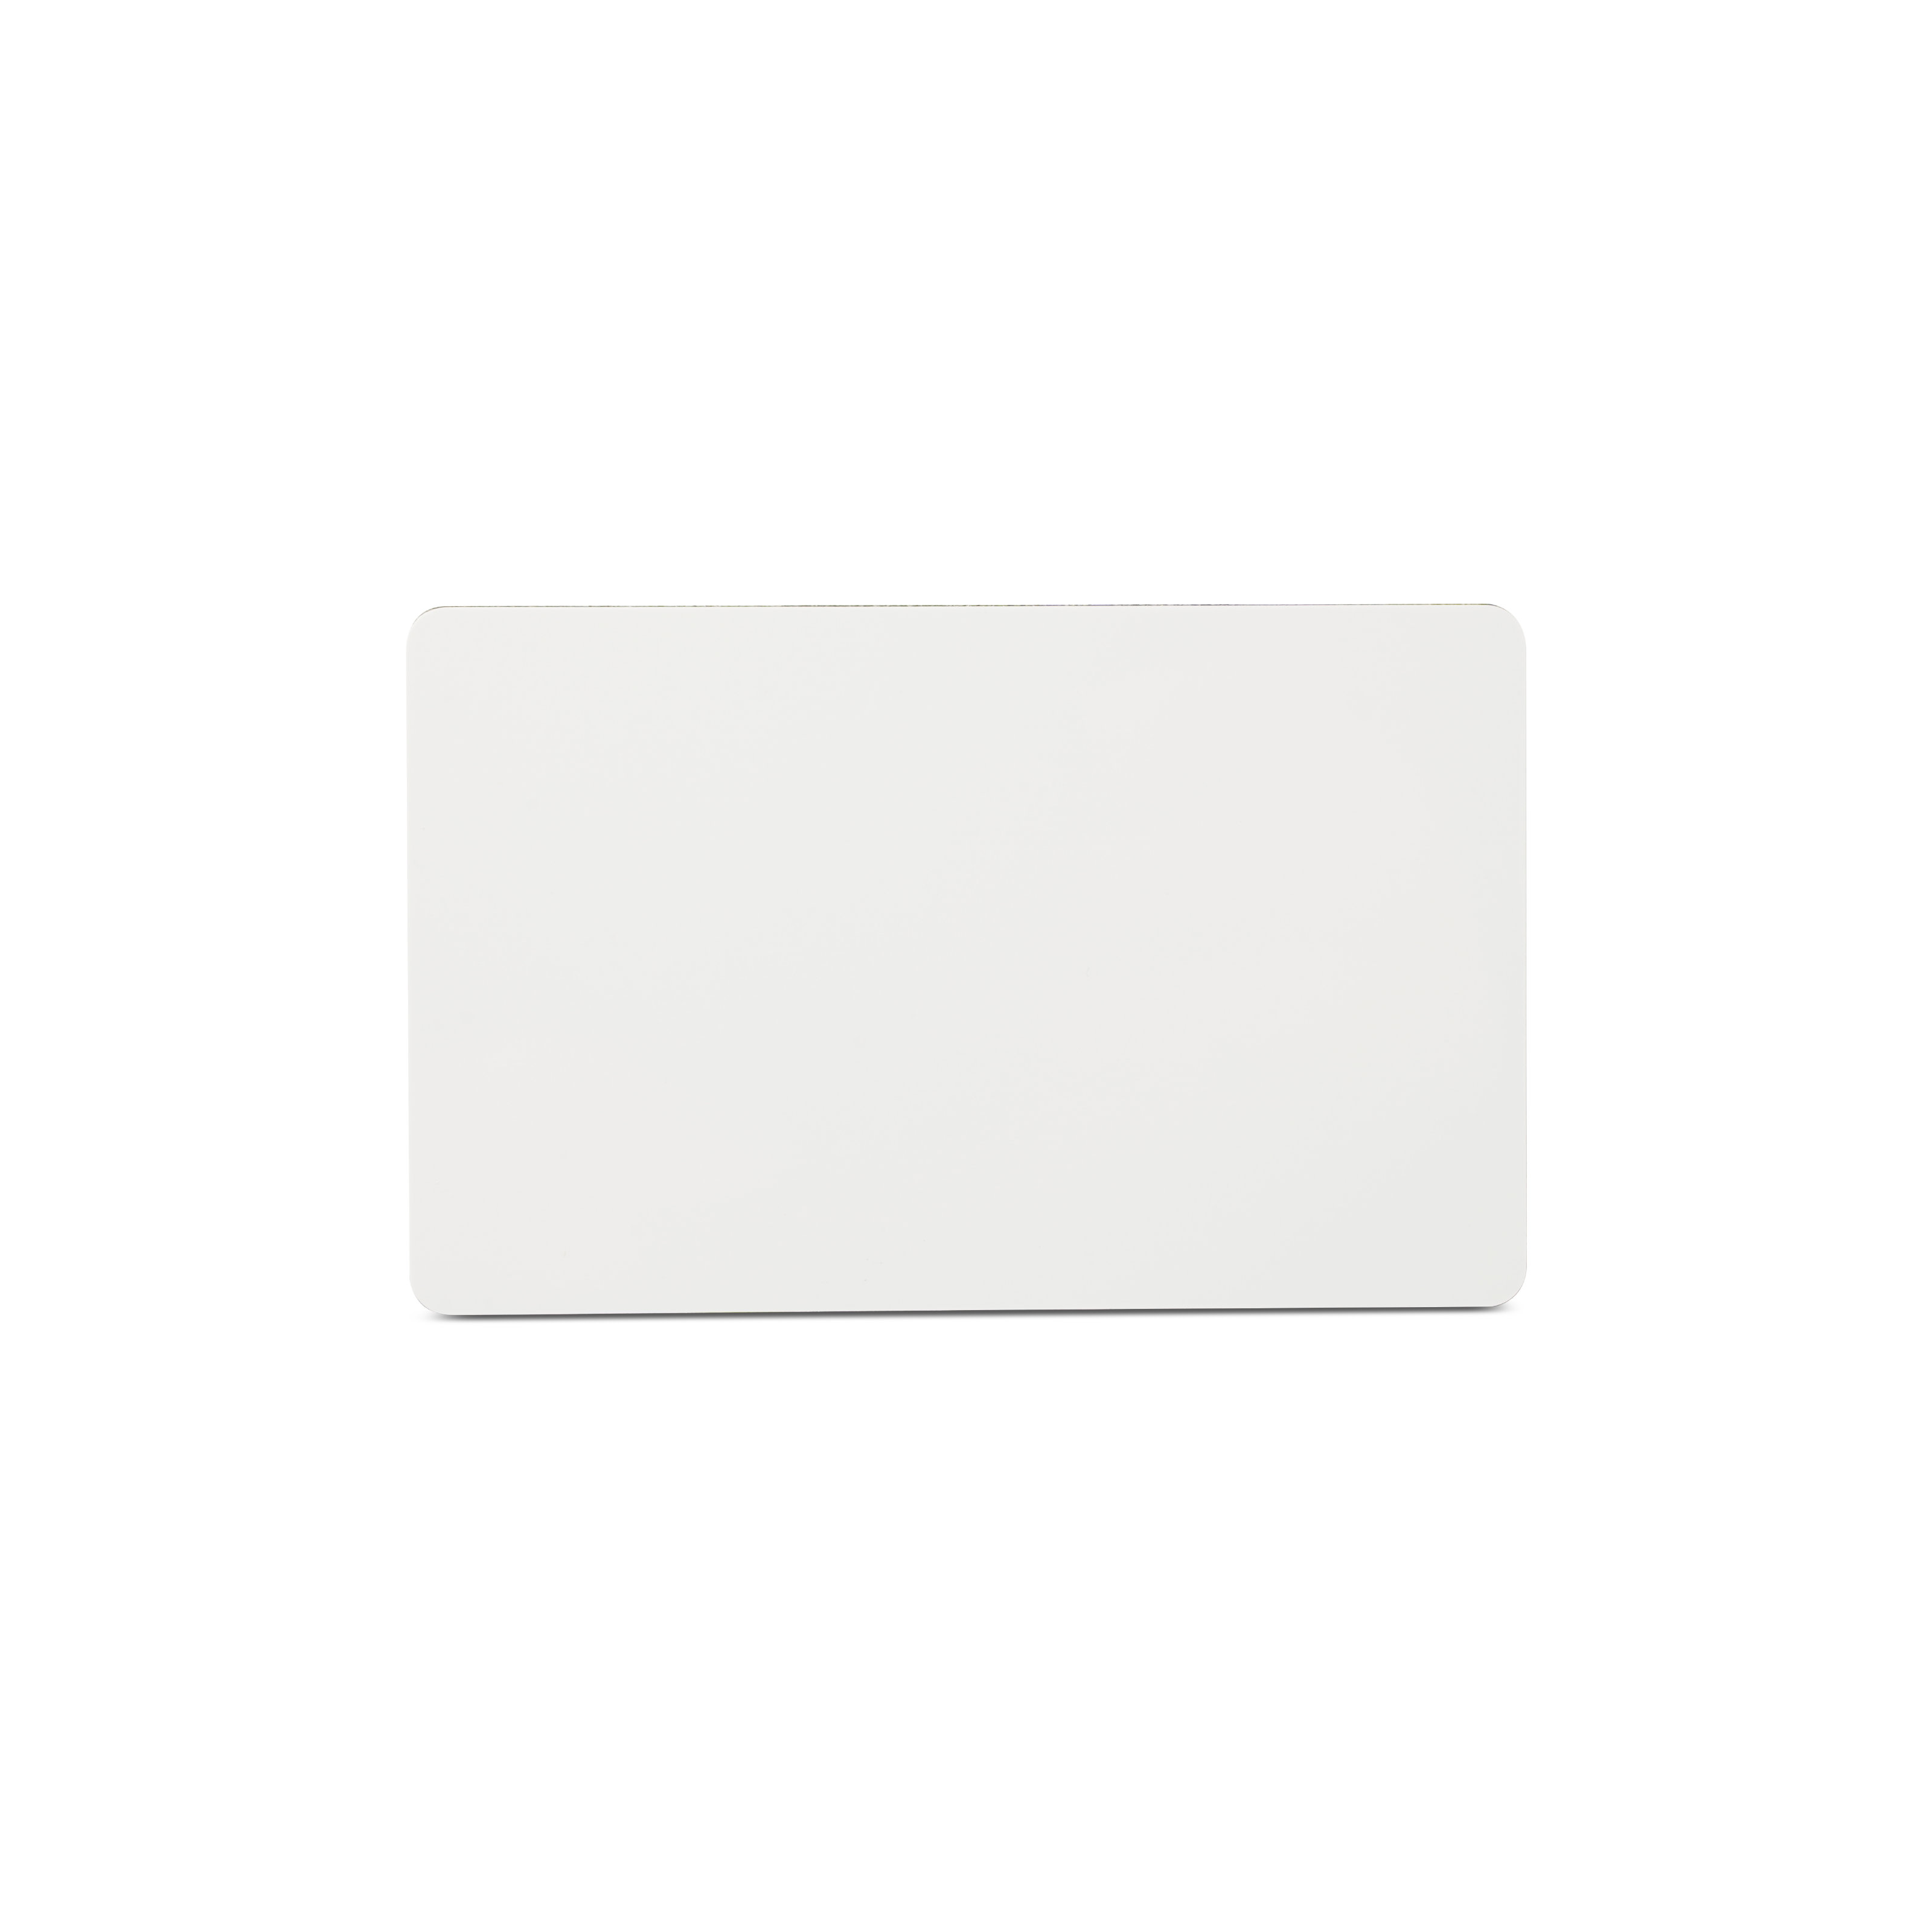 NFC Card PVC - On-Metal - 85,6 x 54 mm - NTAG216 - 924 Byte - white - with 3M adhesive layer